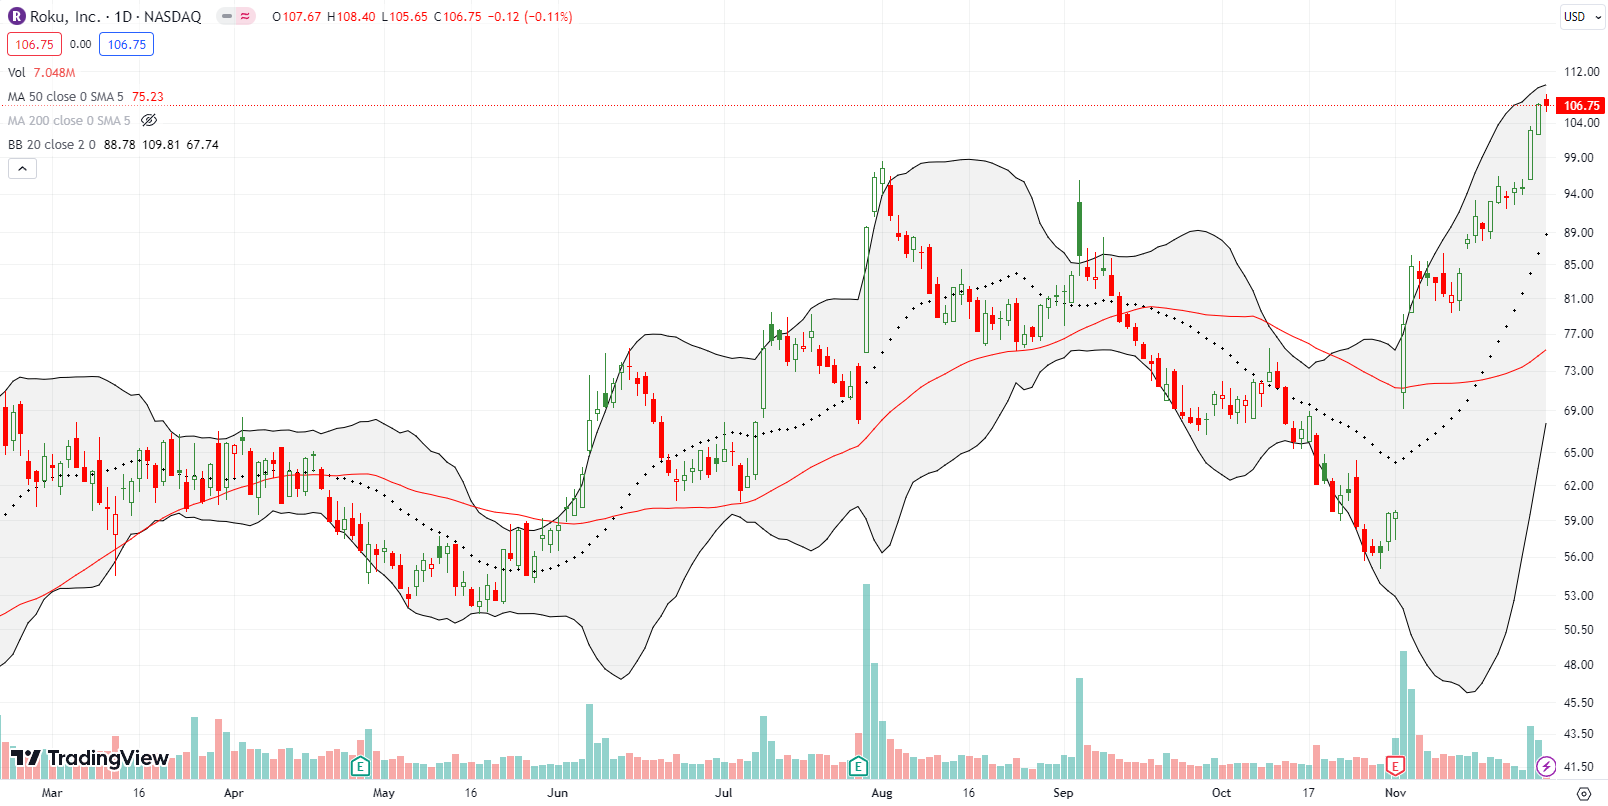 Roku Inc (ROKU) surged upwards, preparing to test resistance from the upper bollinger band.